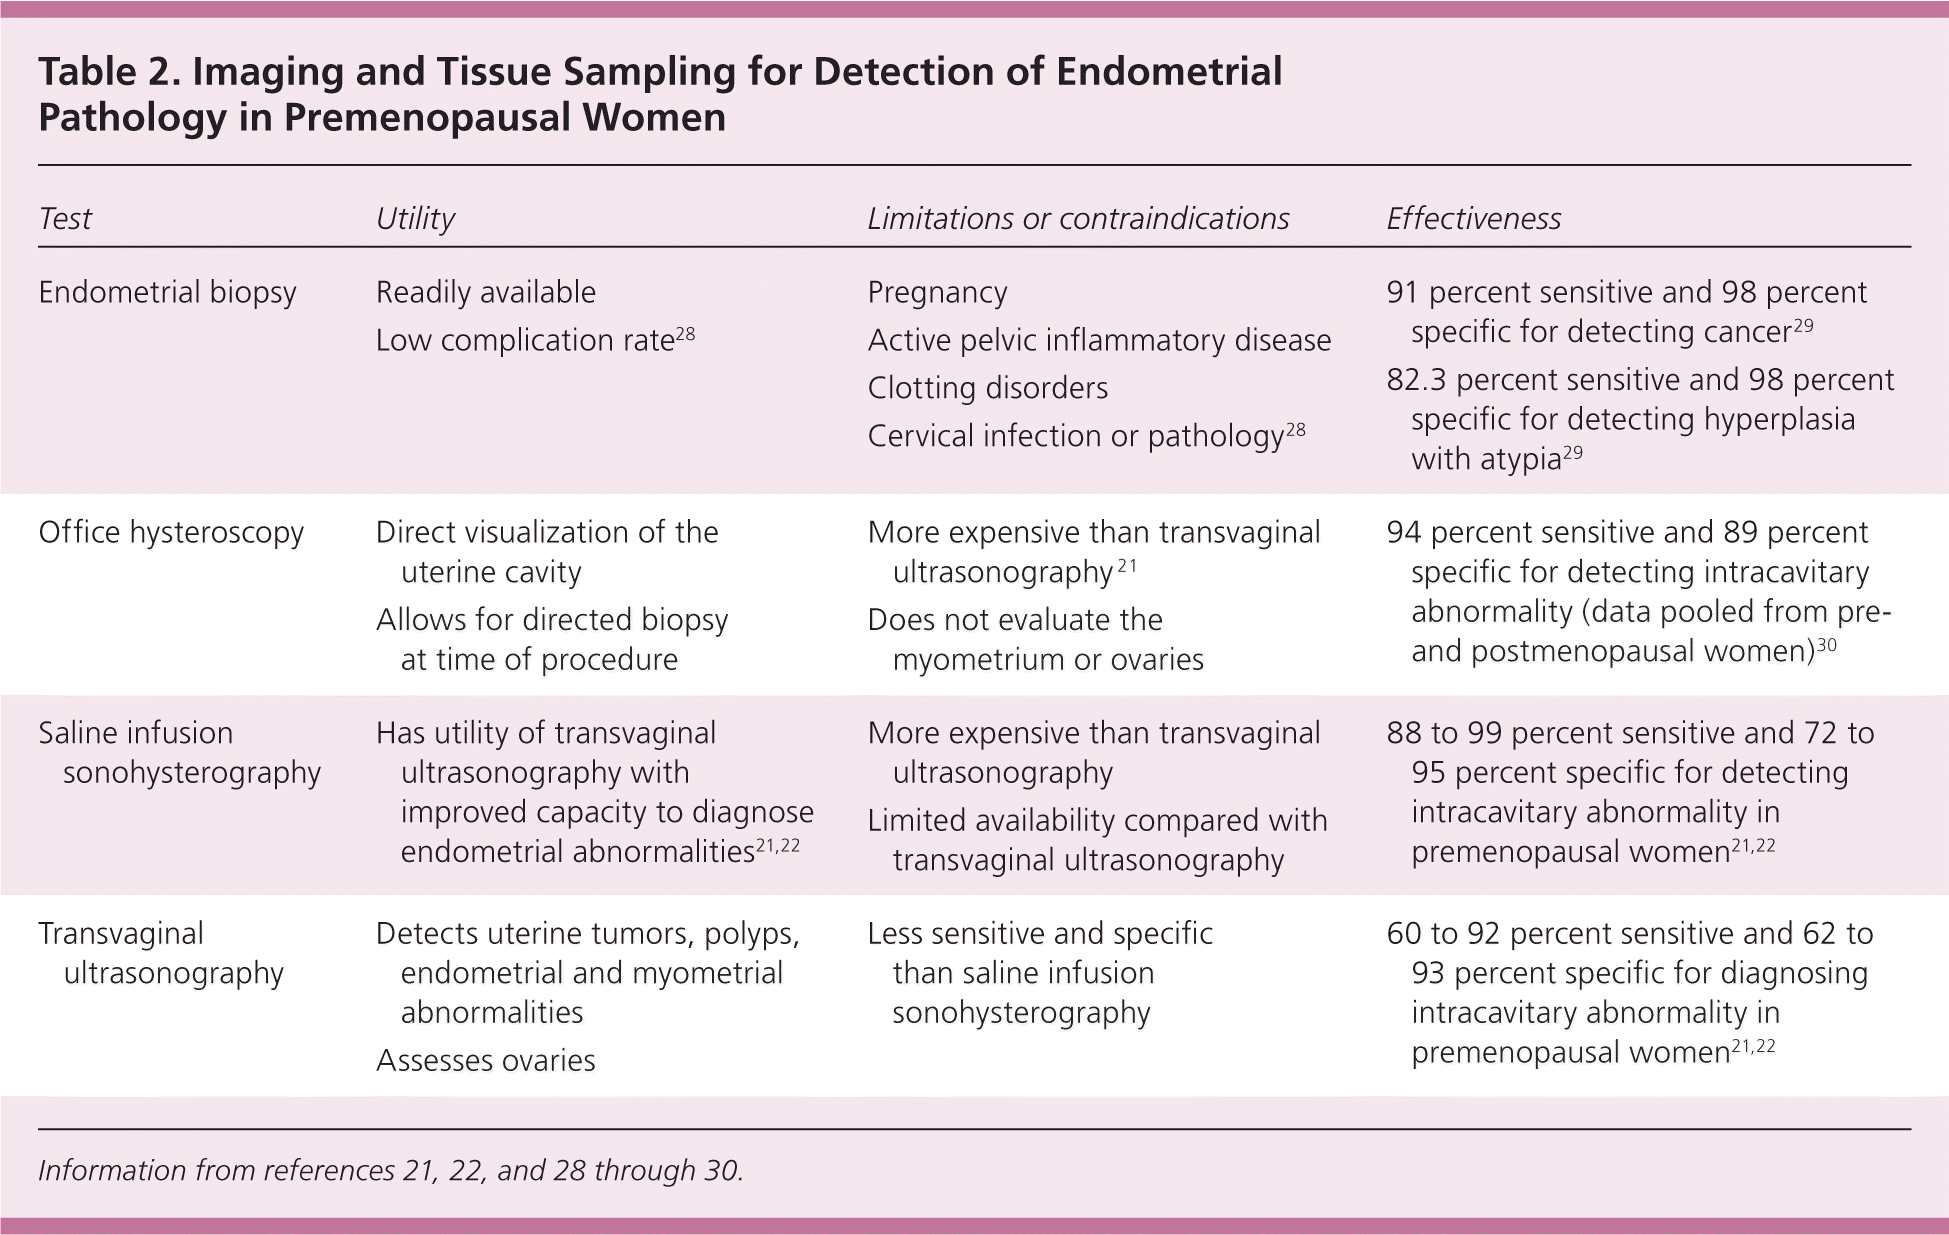 Age-related differential diagnosis of vaginal bleeding in